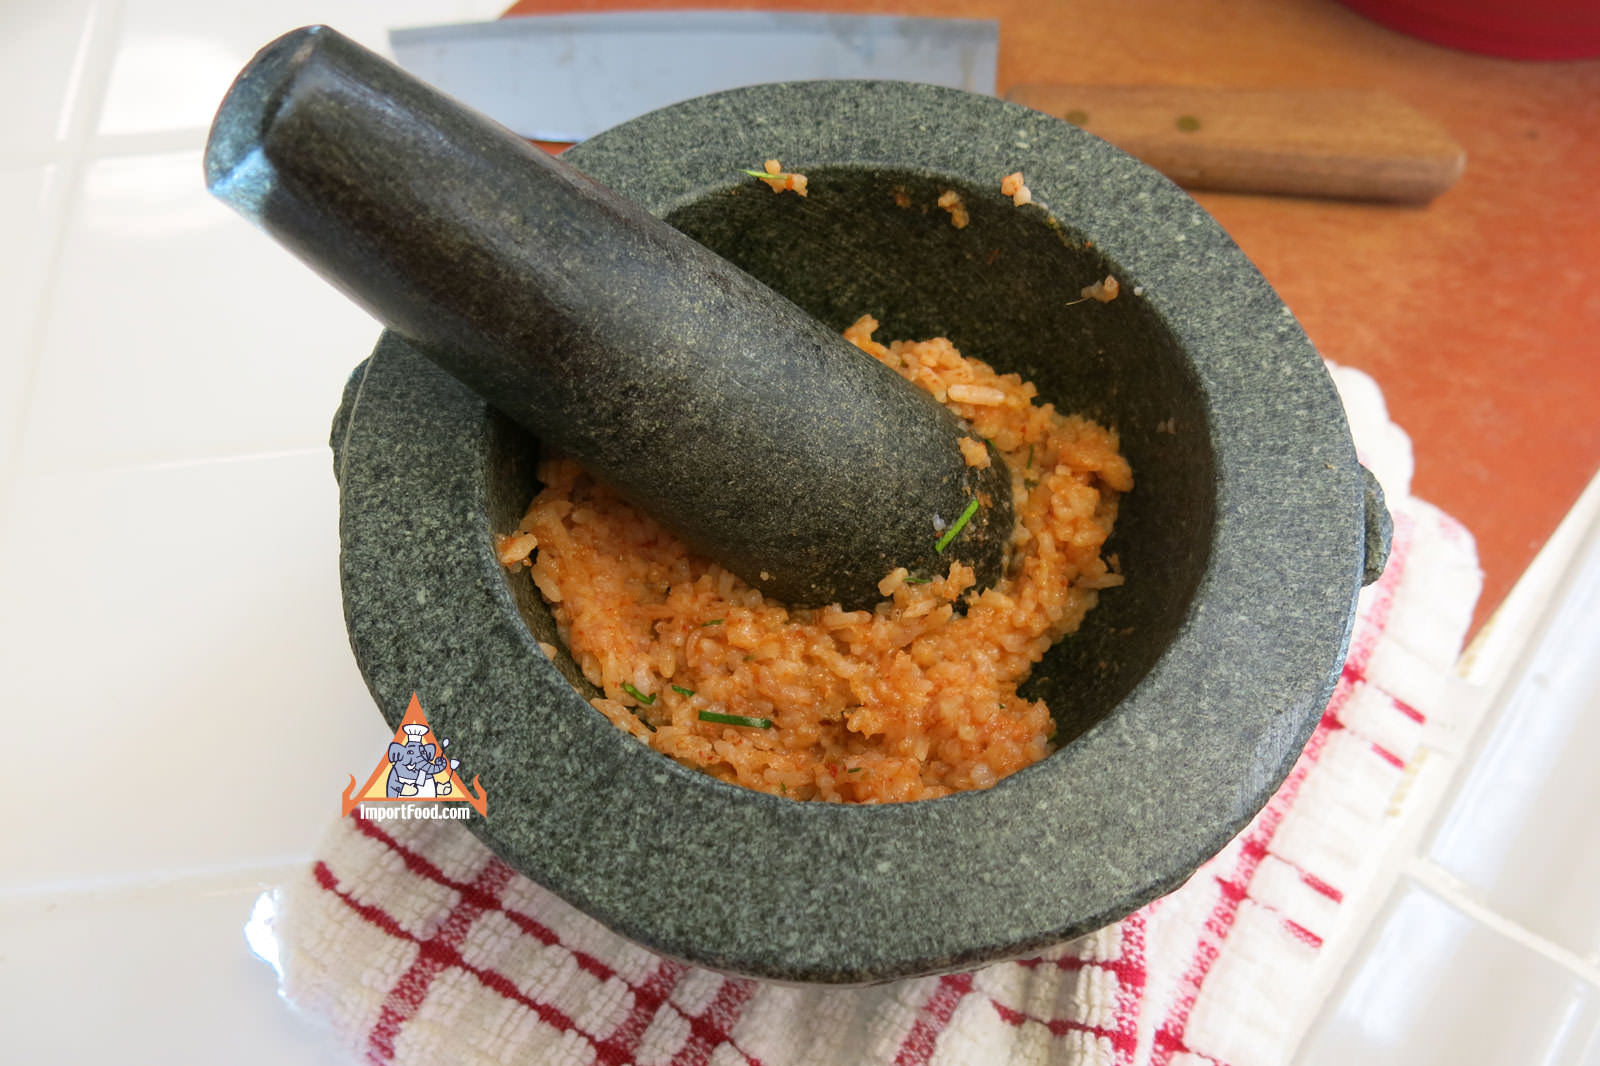 Pound in a mortar and pestle